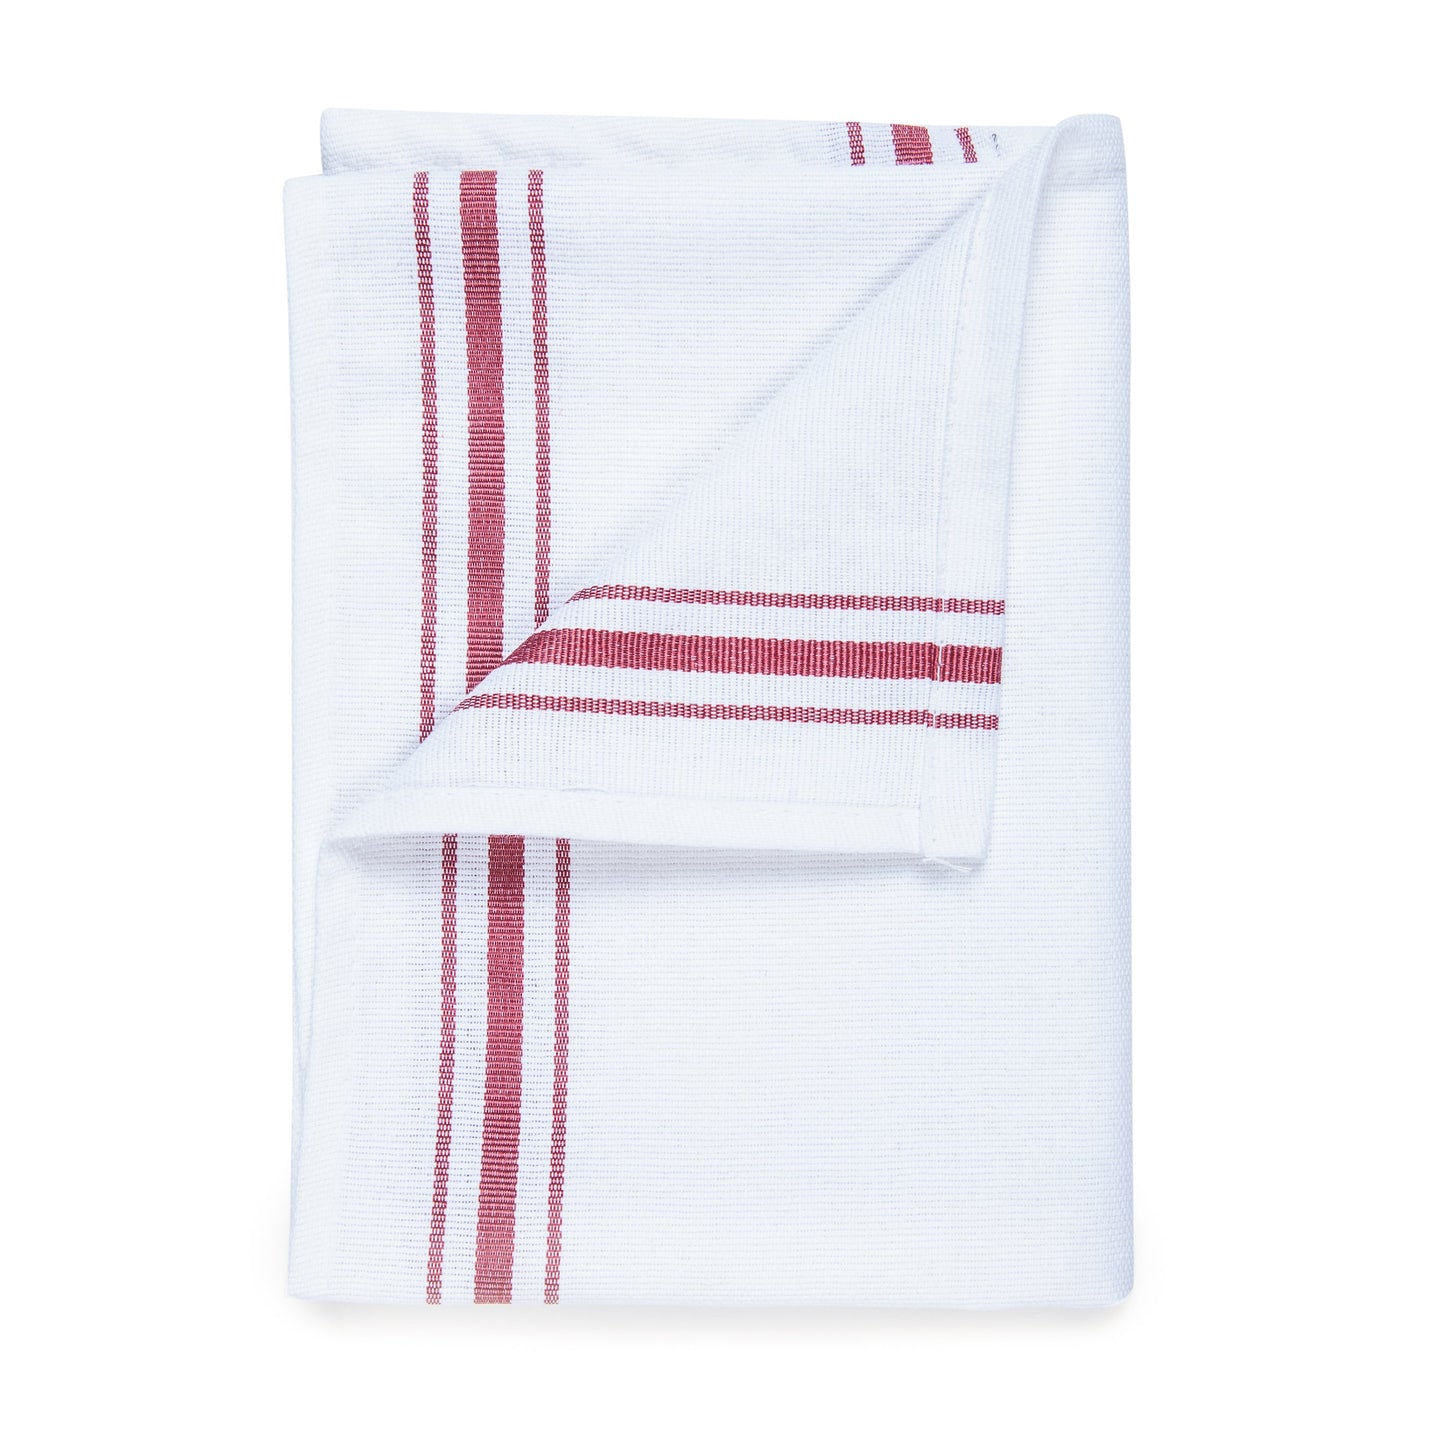 American Dawn | 18X26 Inch White With Red Stripes Napkin | Cloth Lunch Napkin